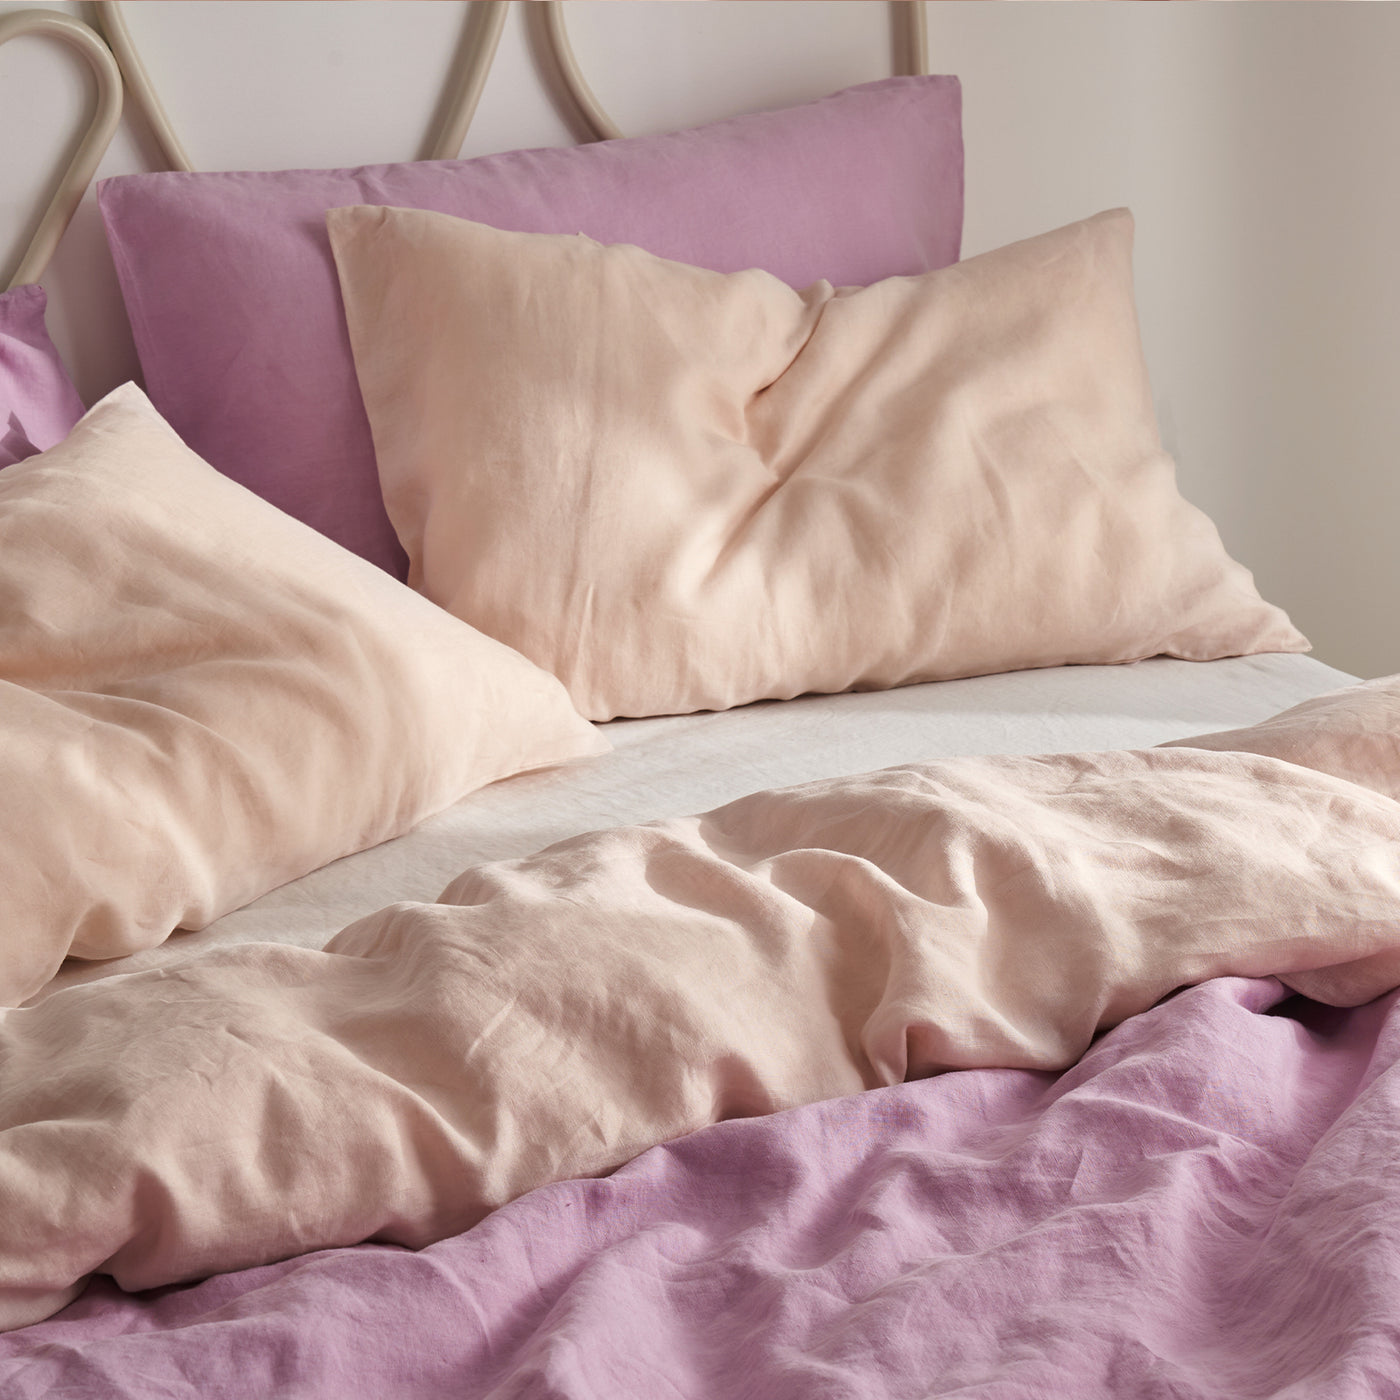 French Flax Linen Double Sided Quilt Cover in Lilac/Blush